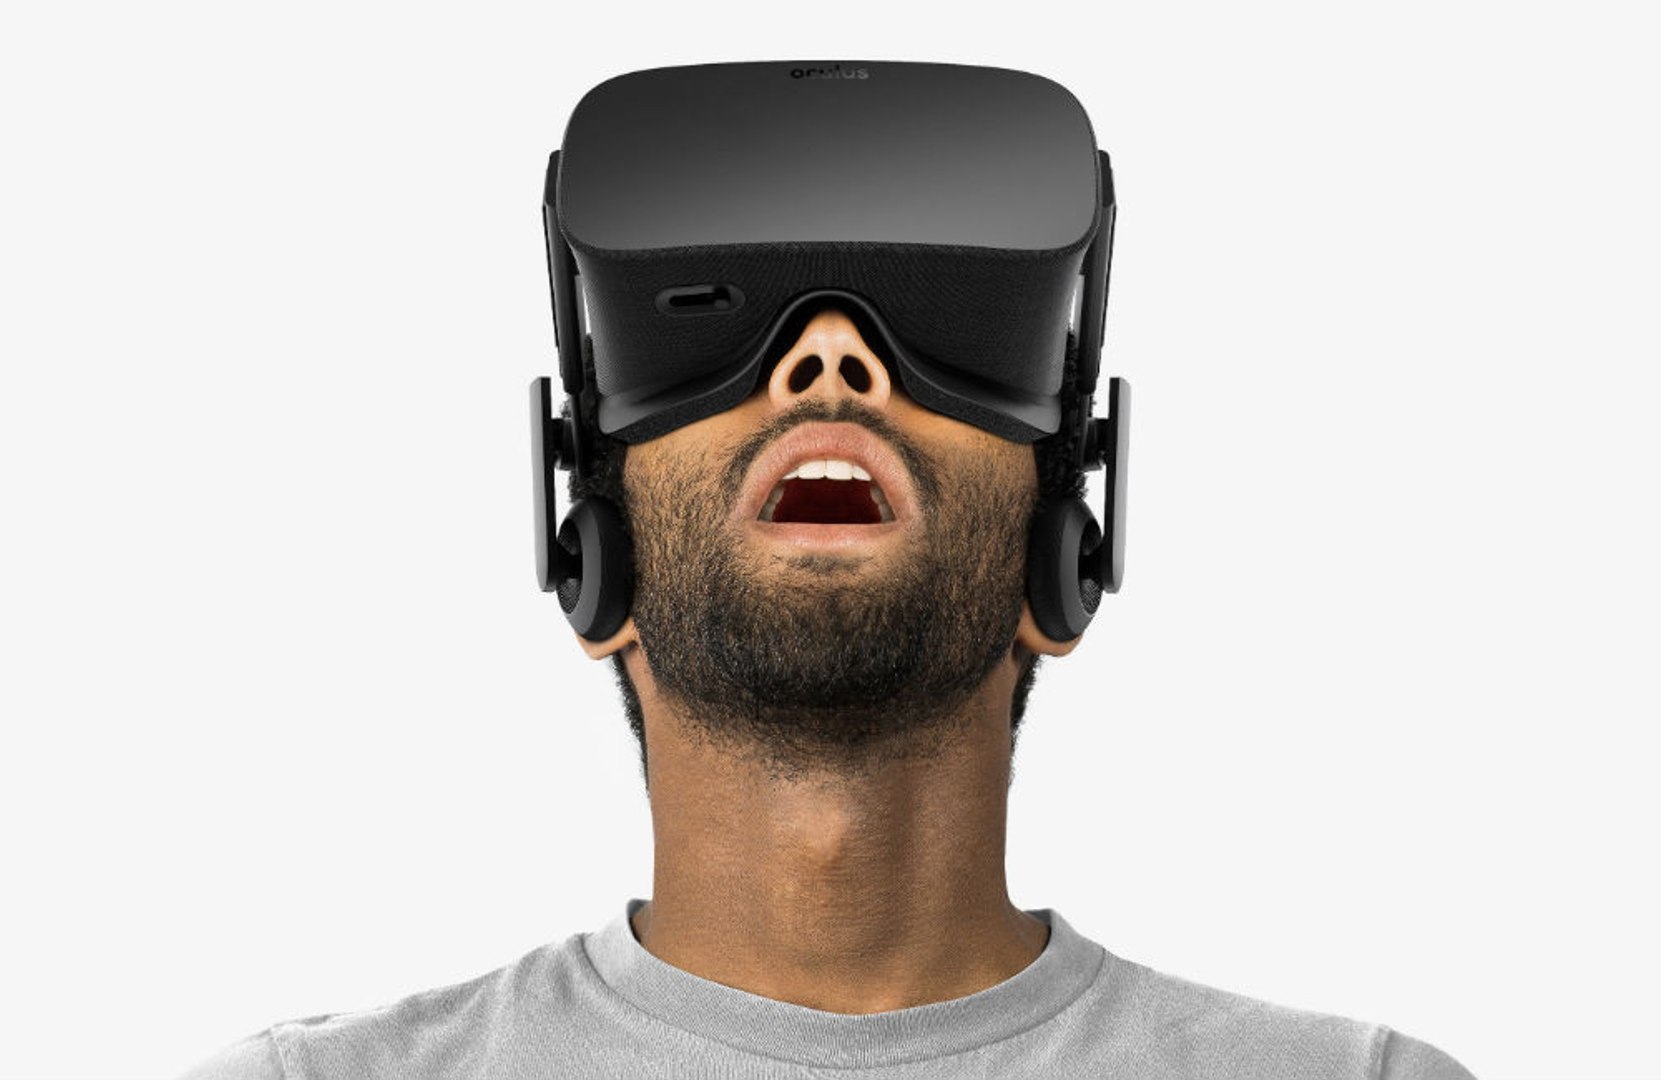 Oculus Quest VR headsets testing Facebook ads - video Dailymotion